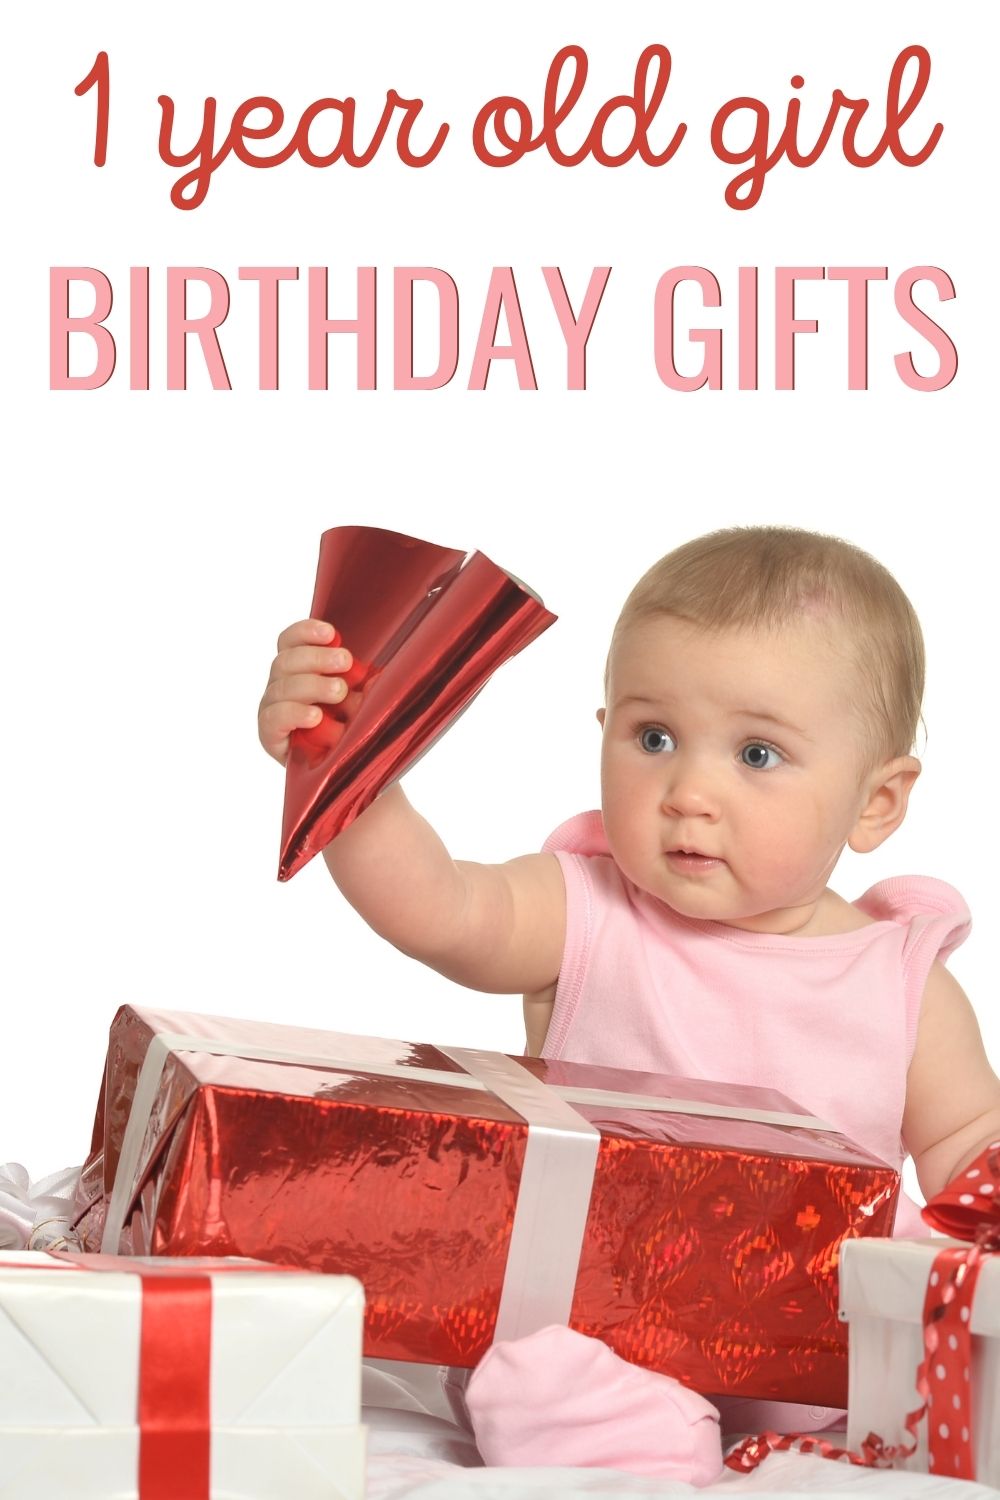 Best birthday gifts for 1 year old girl